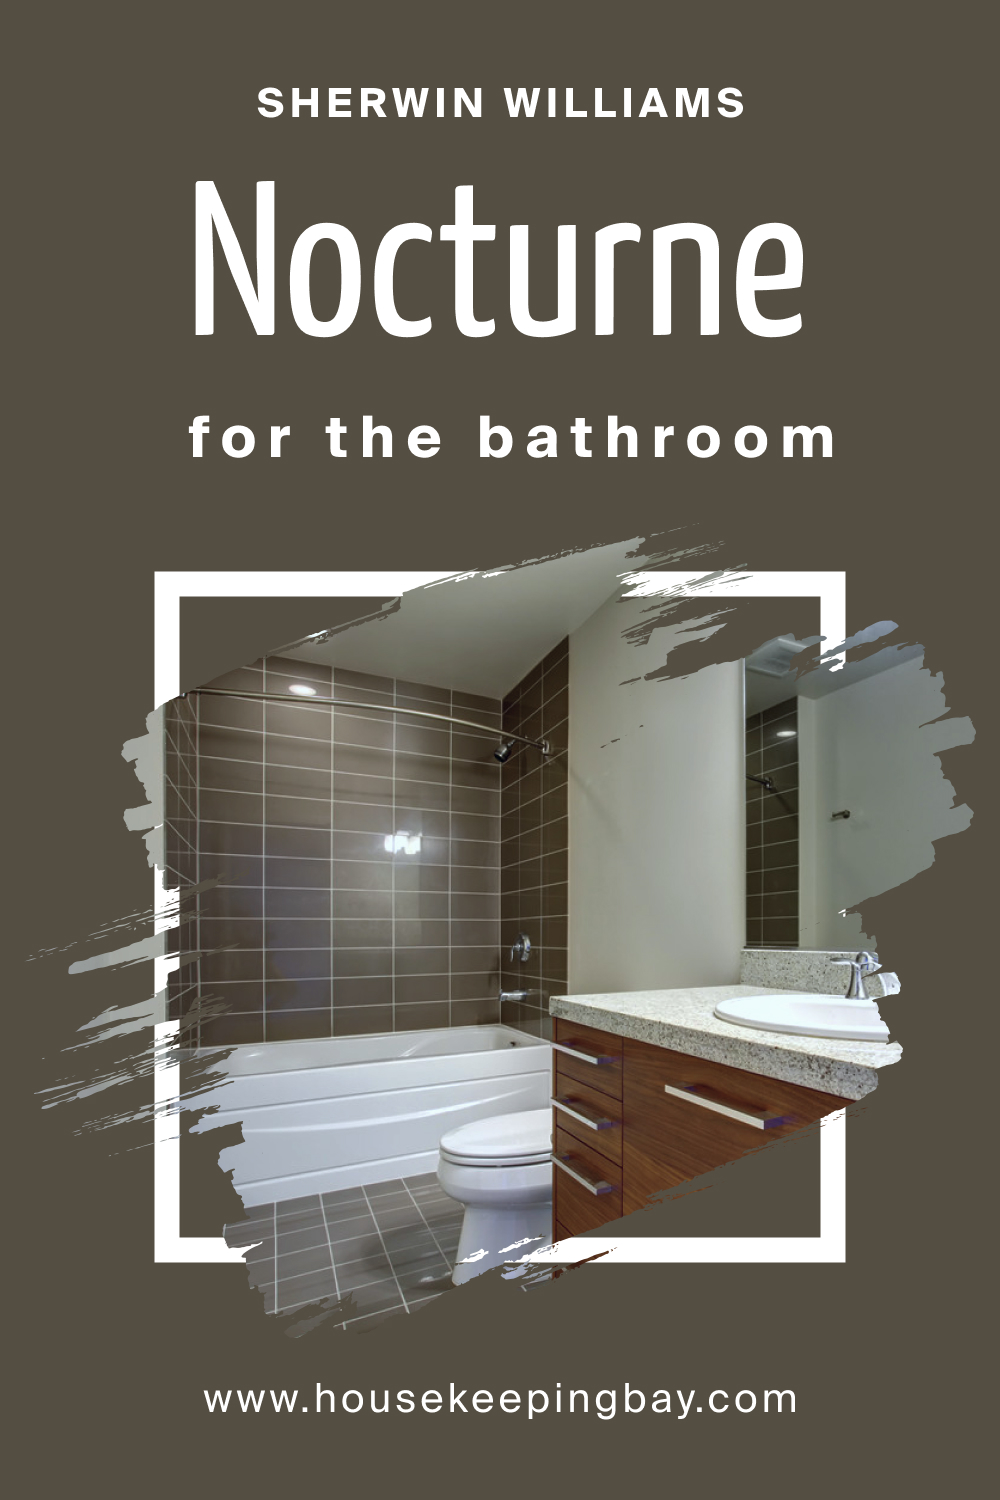 Sherwin Williams. SW 9520 Nocturne For the Bathroom